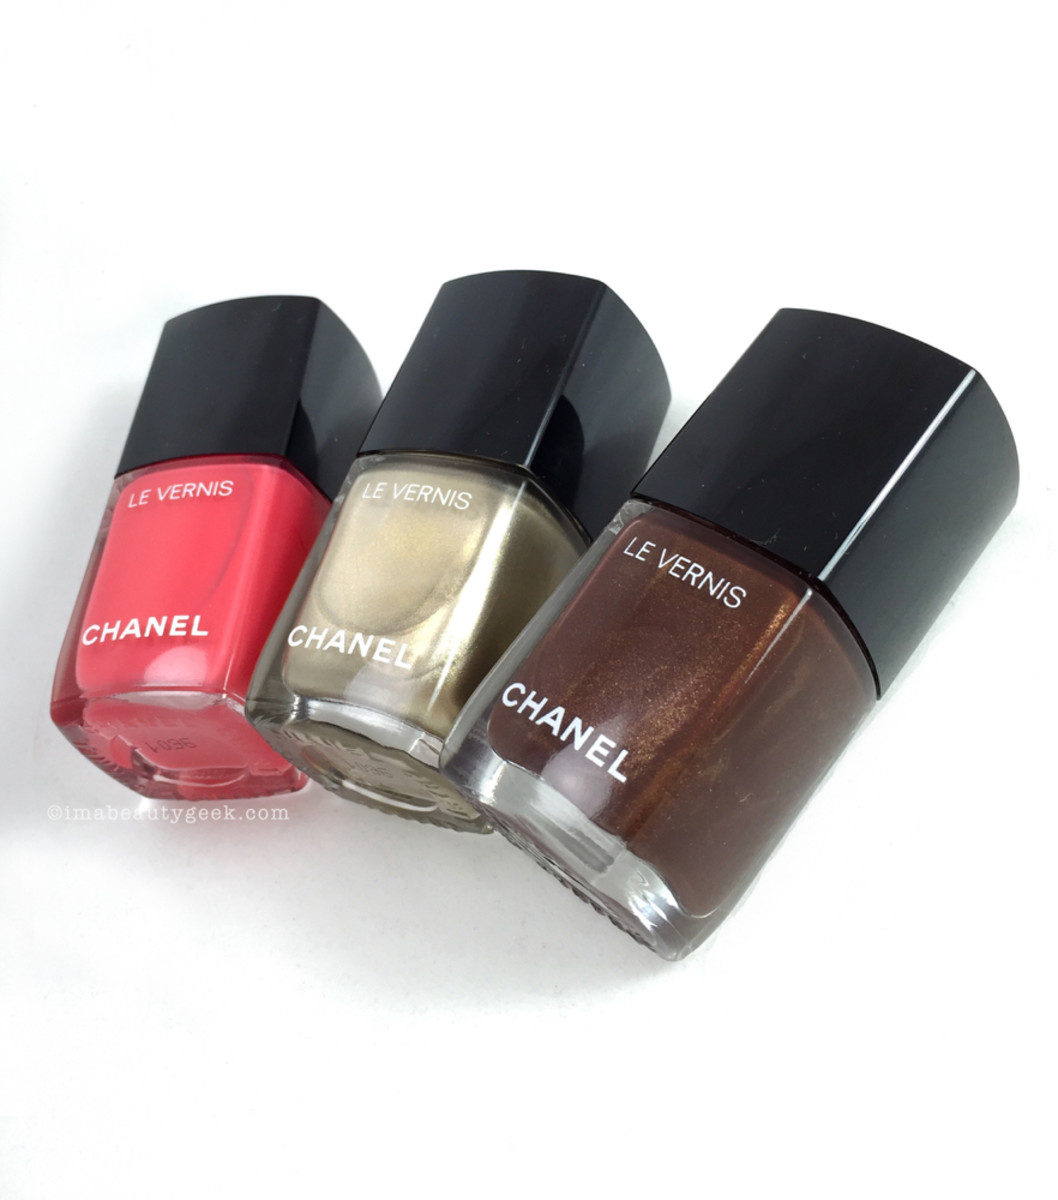 CHANEL SUMMER 2016 VERNIS SWATCHES & REVIEW